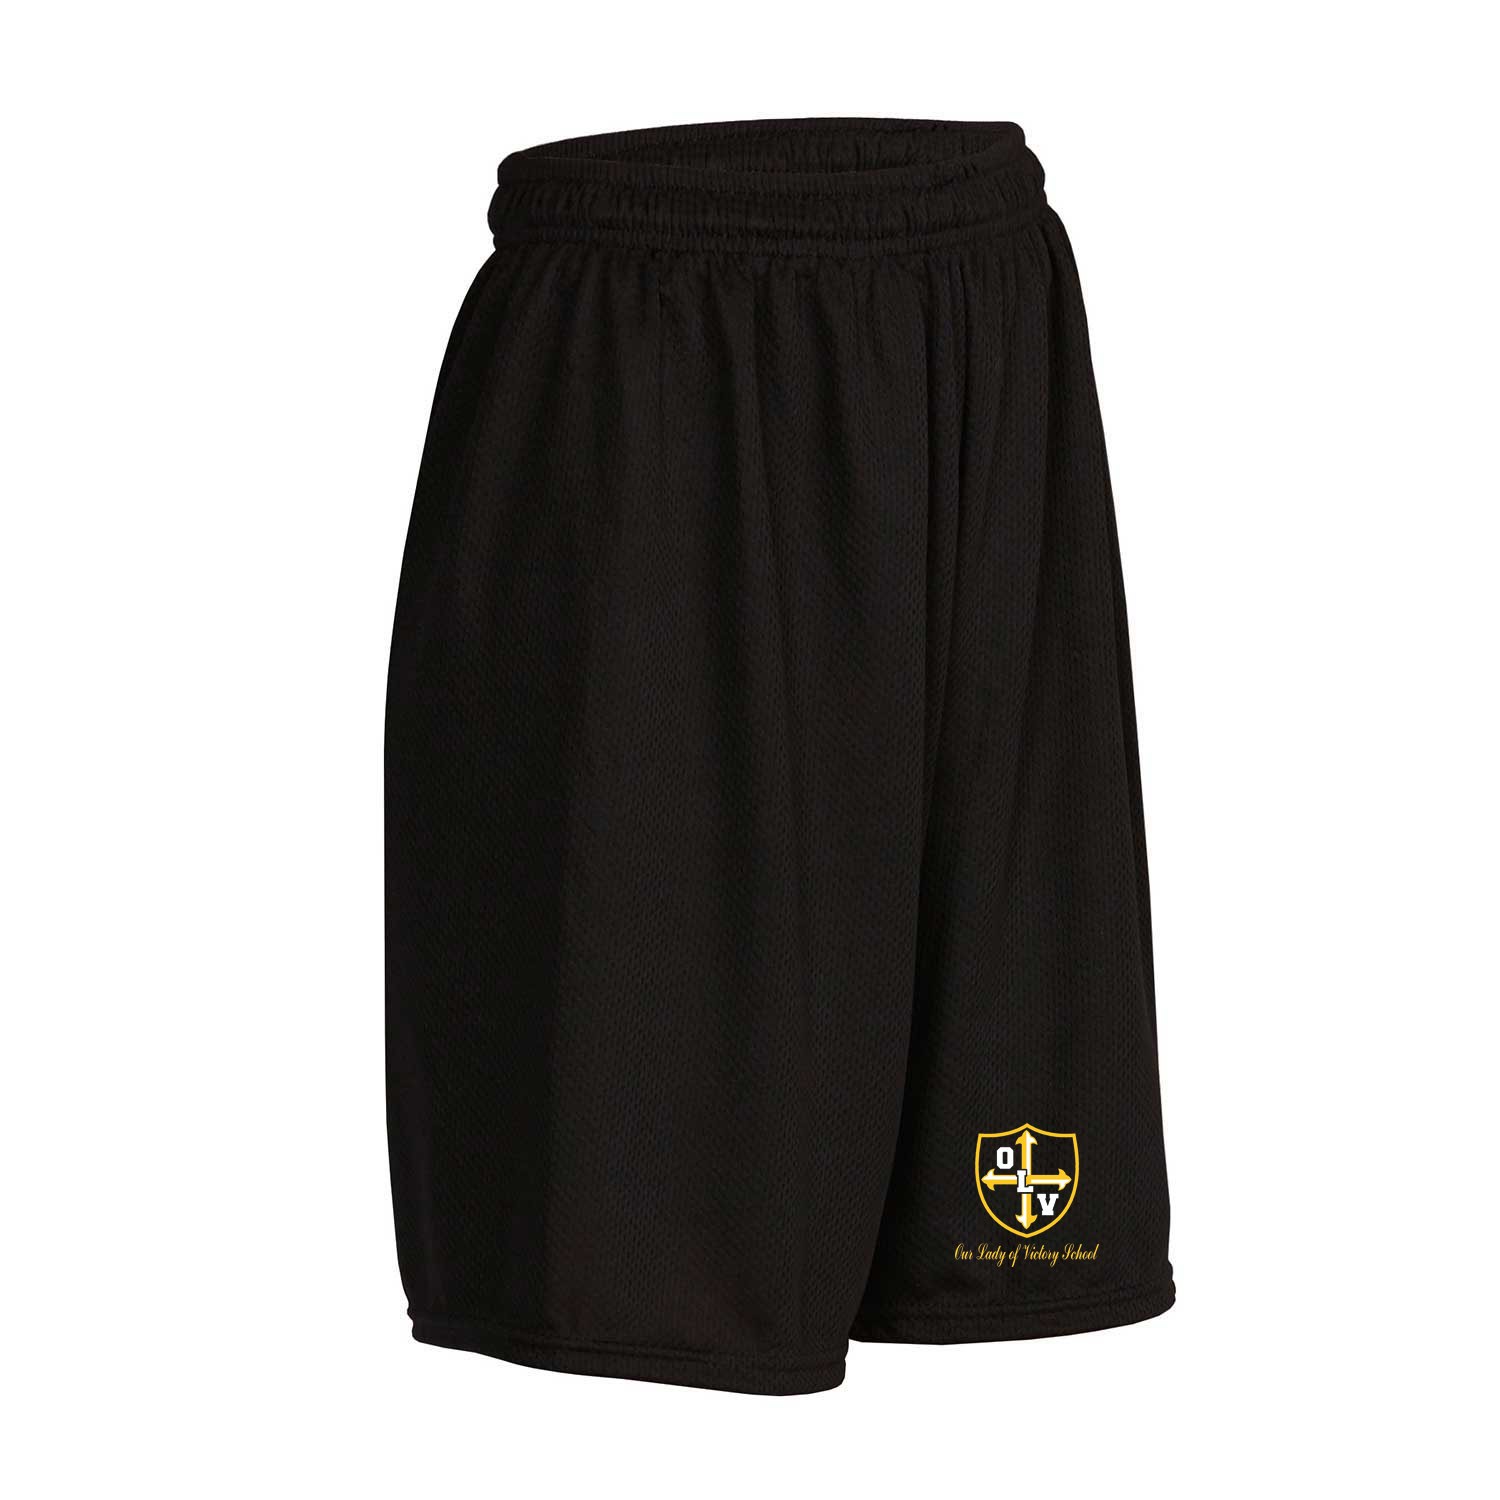 OLV Spirit Shorts w/ Logo - Please Allow 2-3 Weeks for Delivery